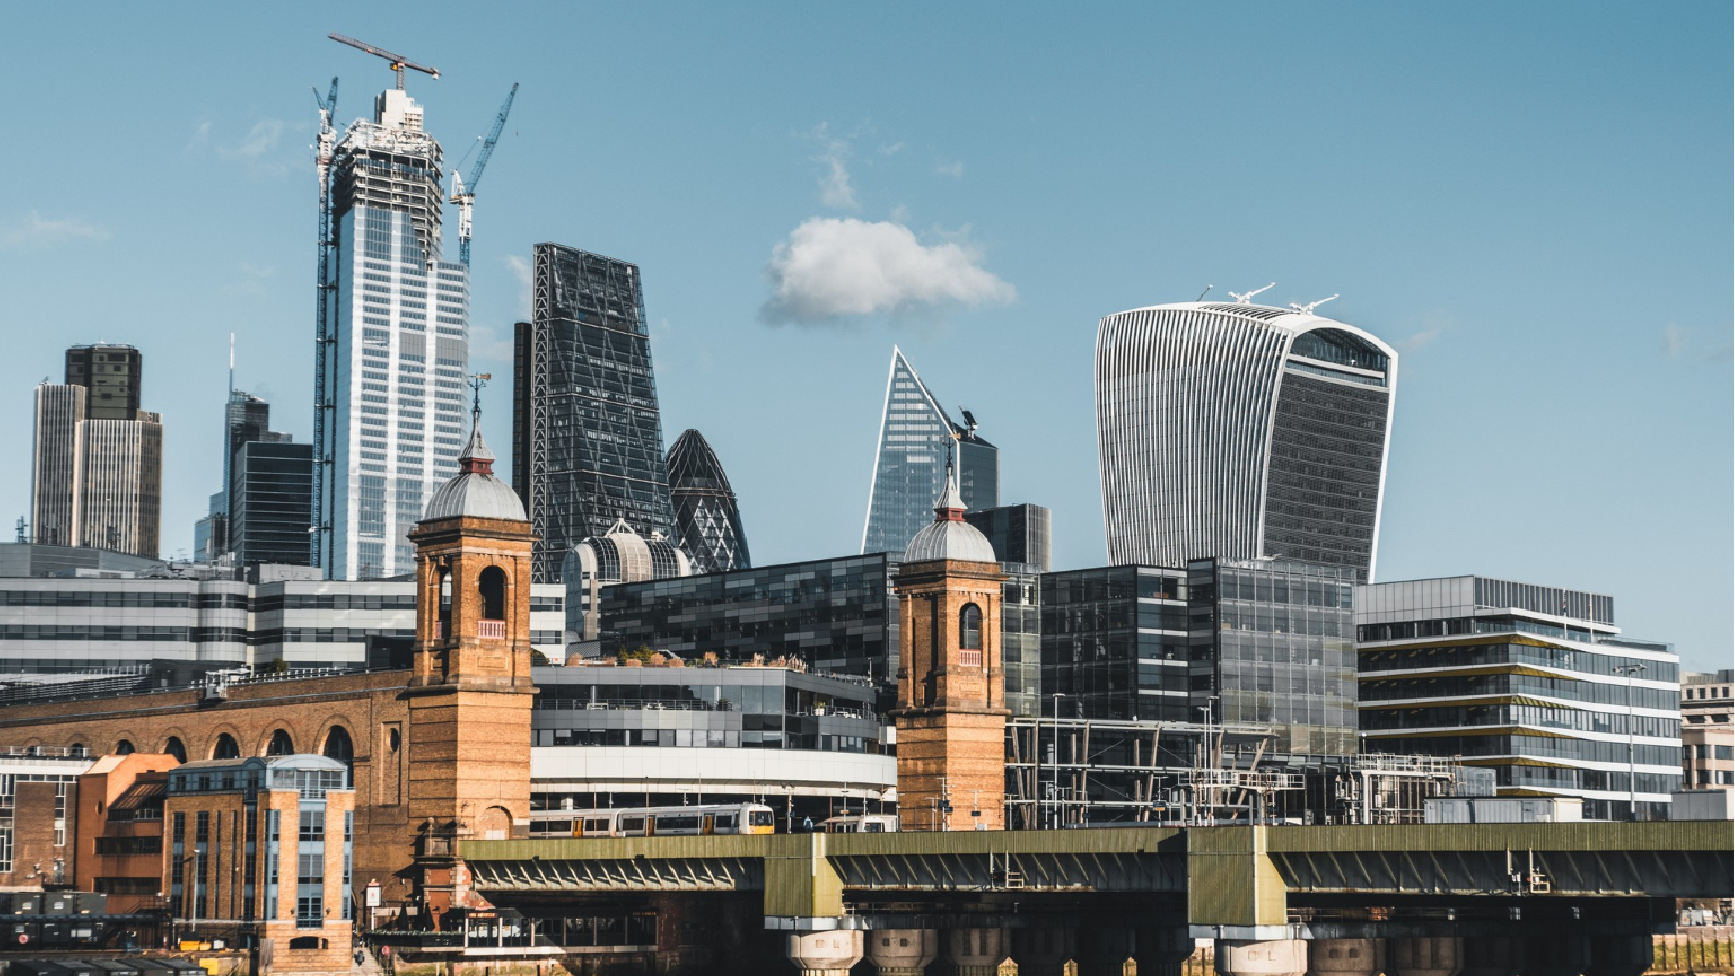 London's financial district, an epicenter affected by the UK’s New Statement of Changes, impacting businesses and sponsorships